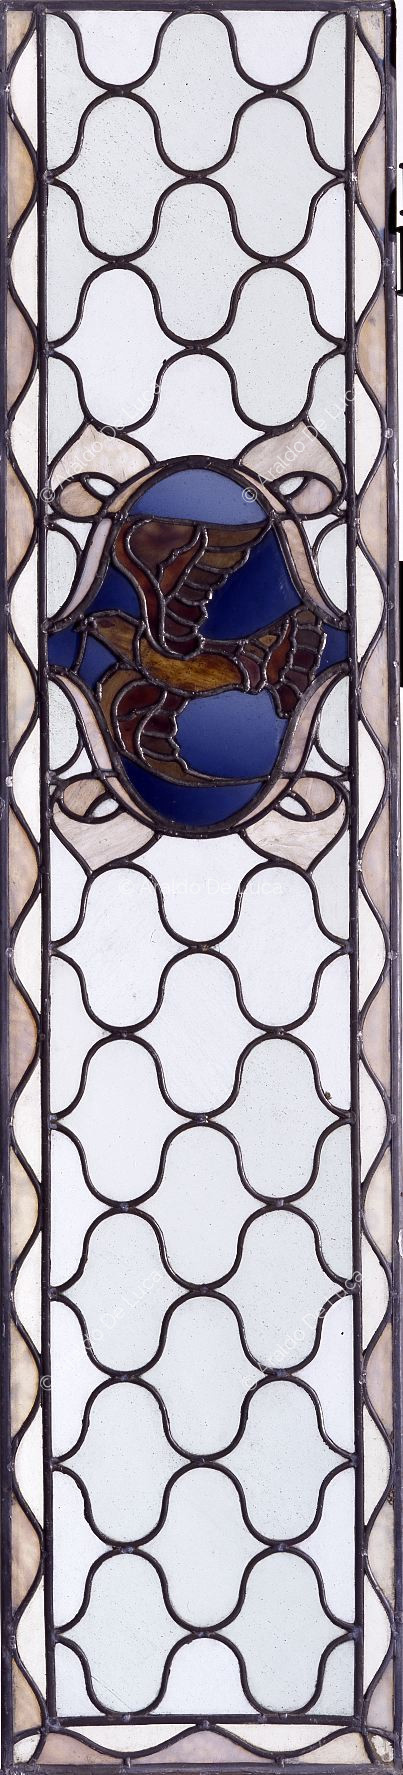 Stained glass window with geometric motif and dove